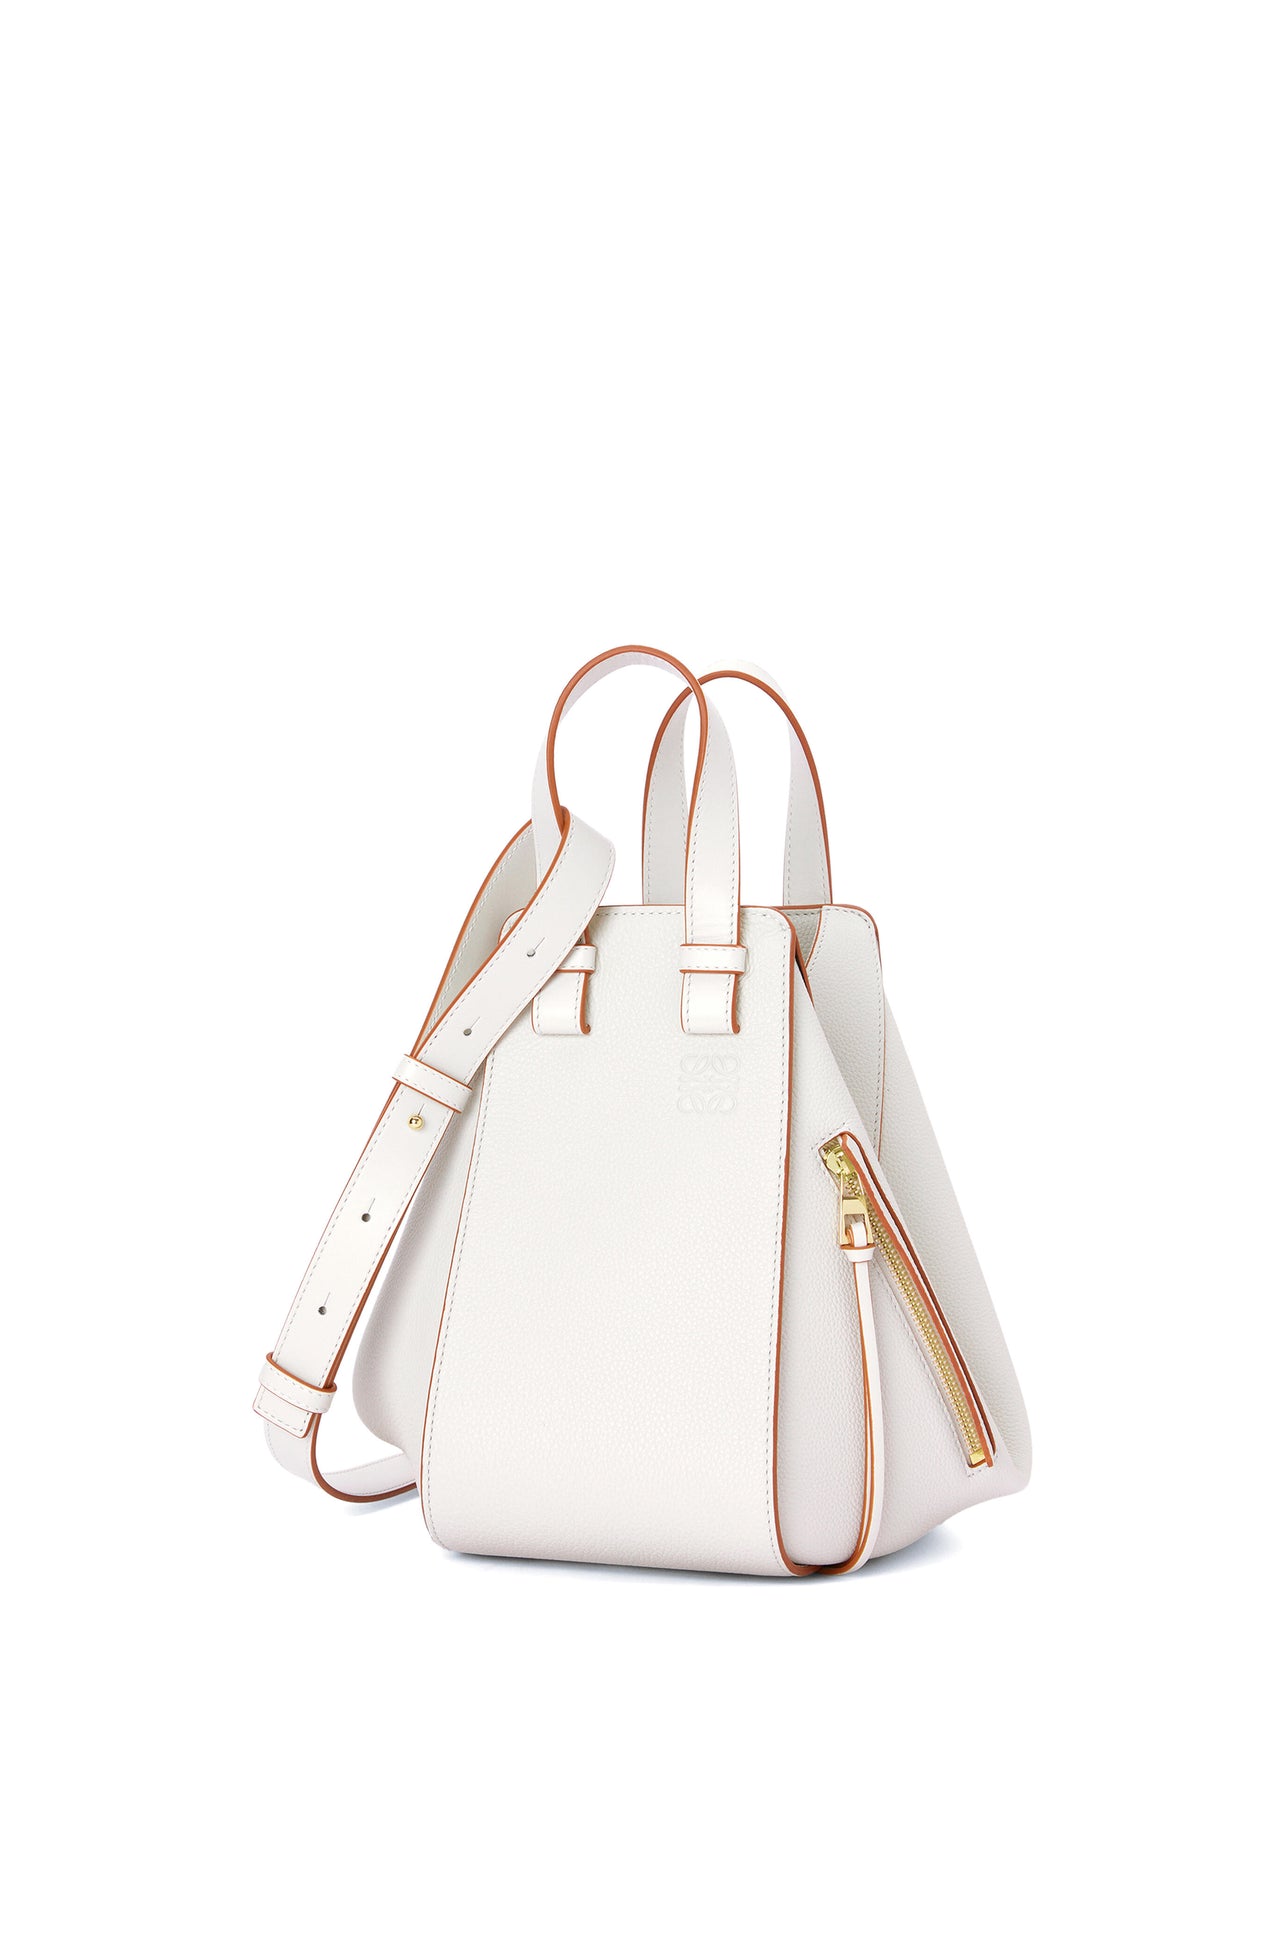 Loewe Small Hammock bag in soft grained calfskin (Colour:  Soft White No. 2)